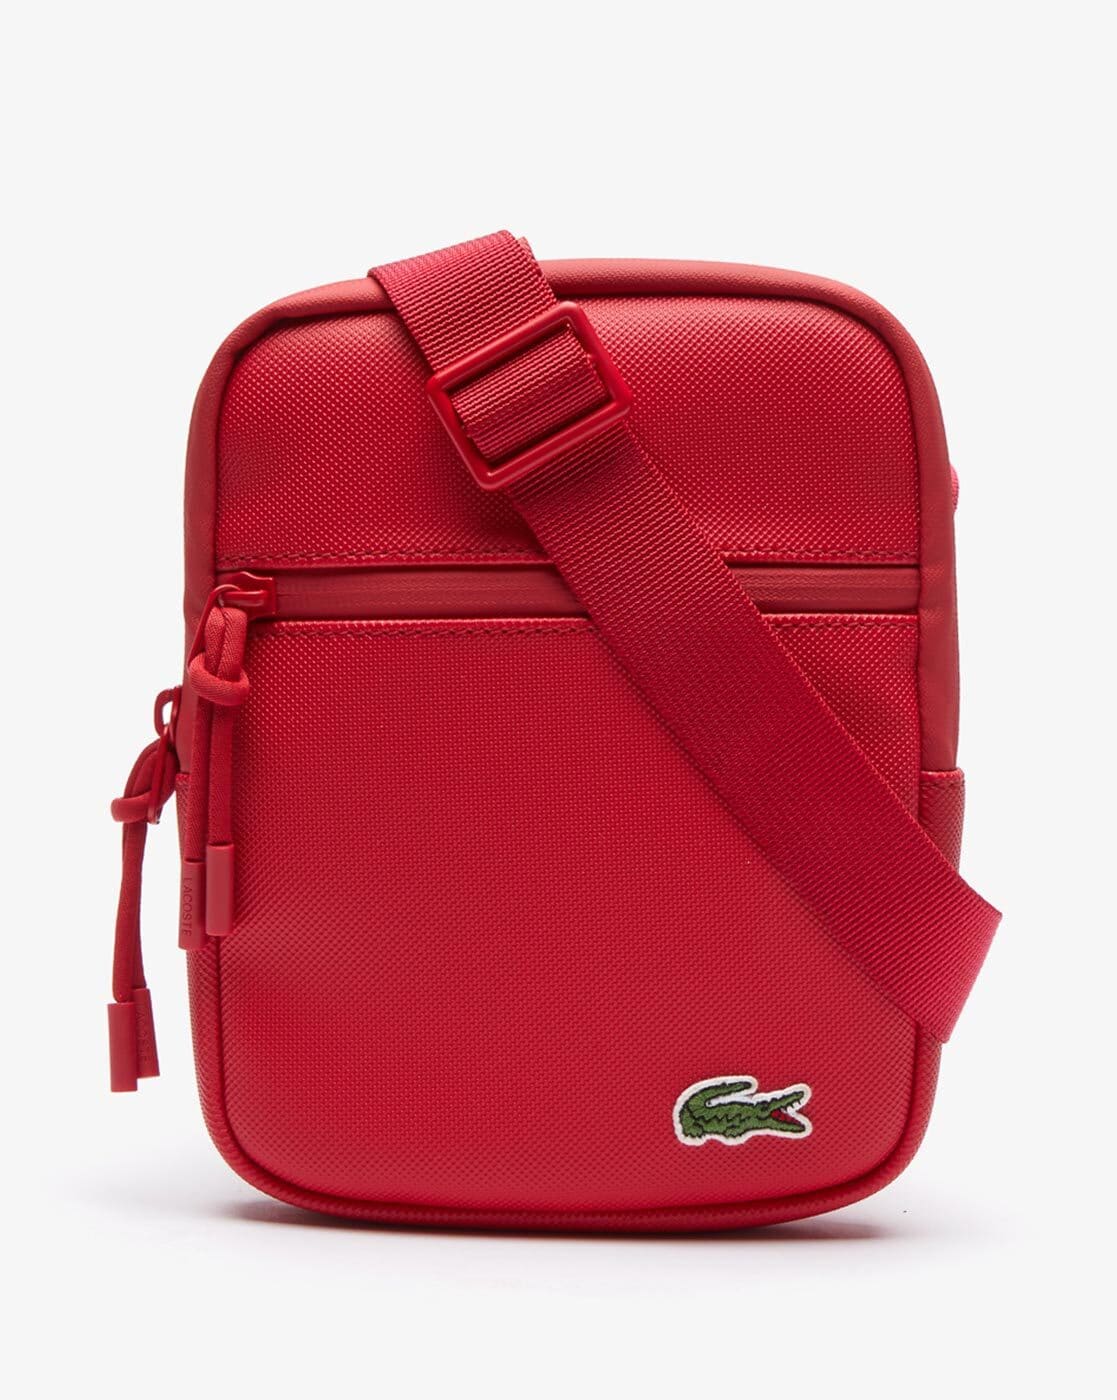 Lacoste Purse | Bags, Lacoste bag women, Girly bags